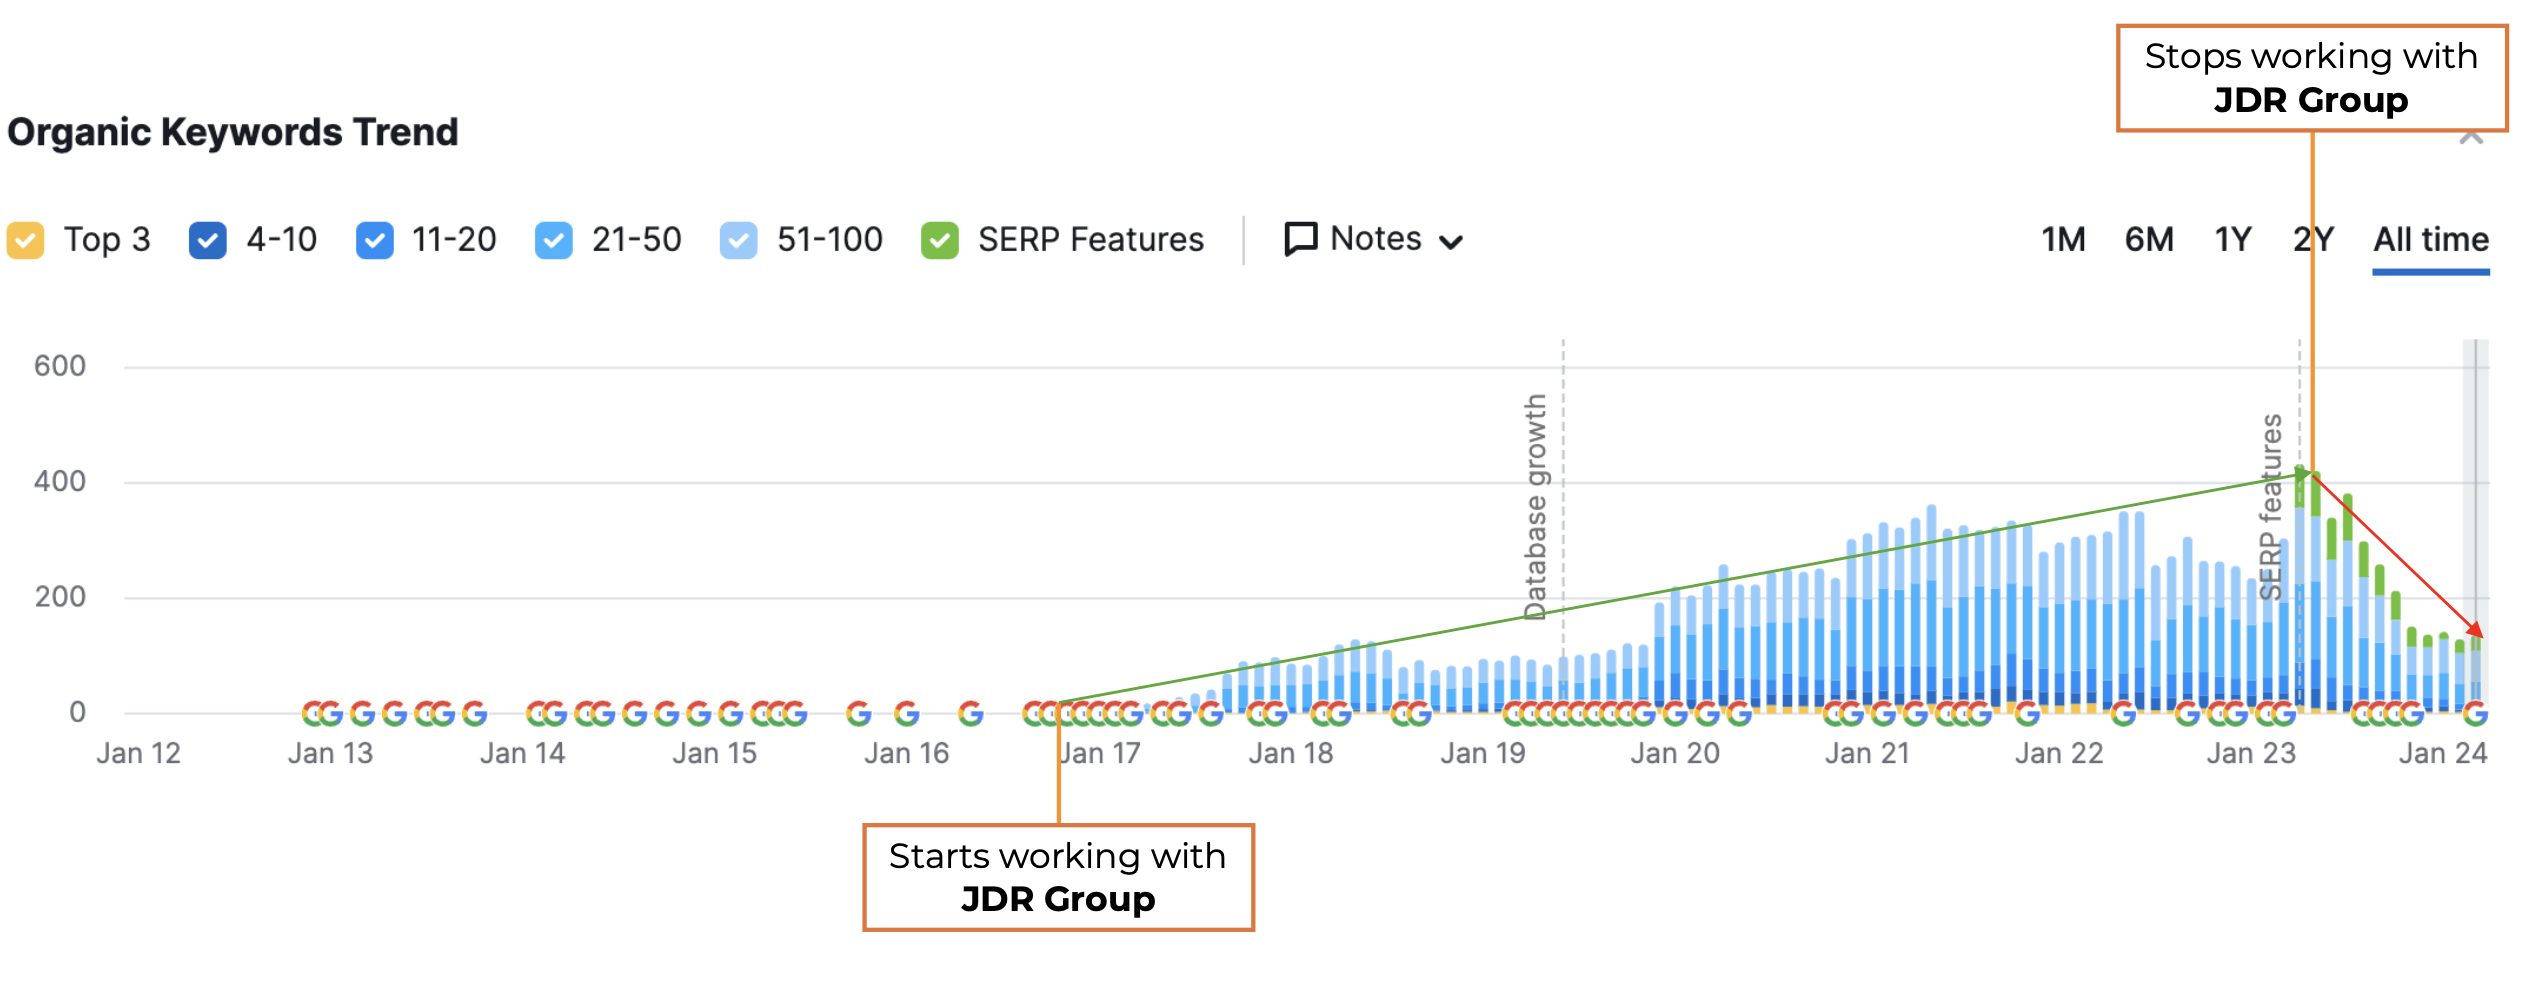 JDR Group Case Study - before and after stopping inbound marketing - 7